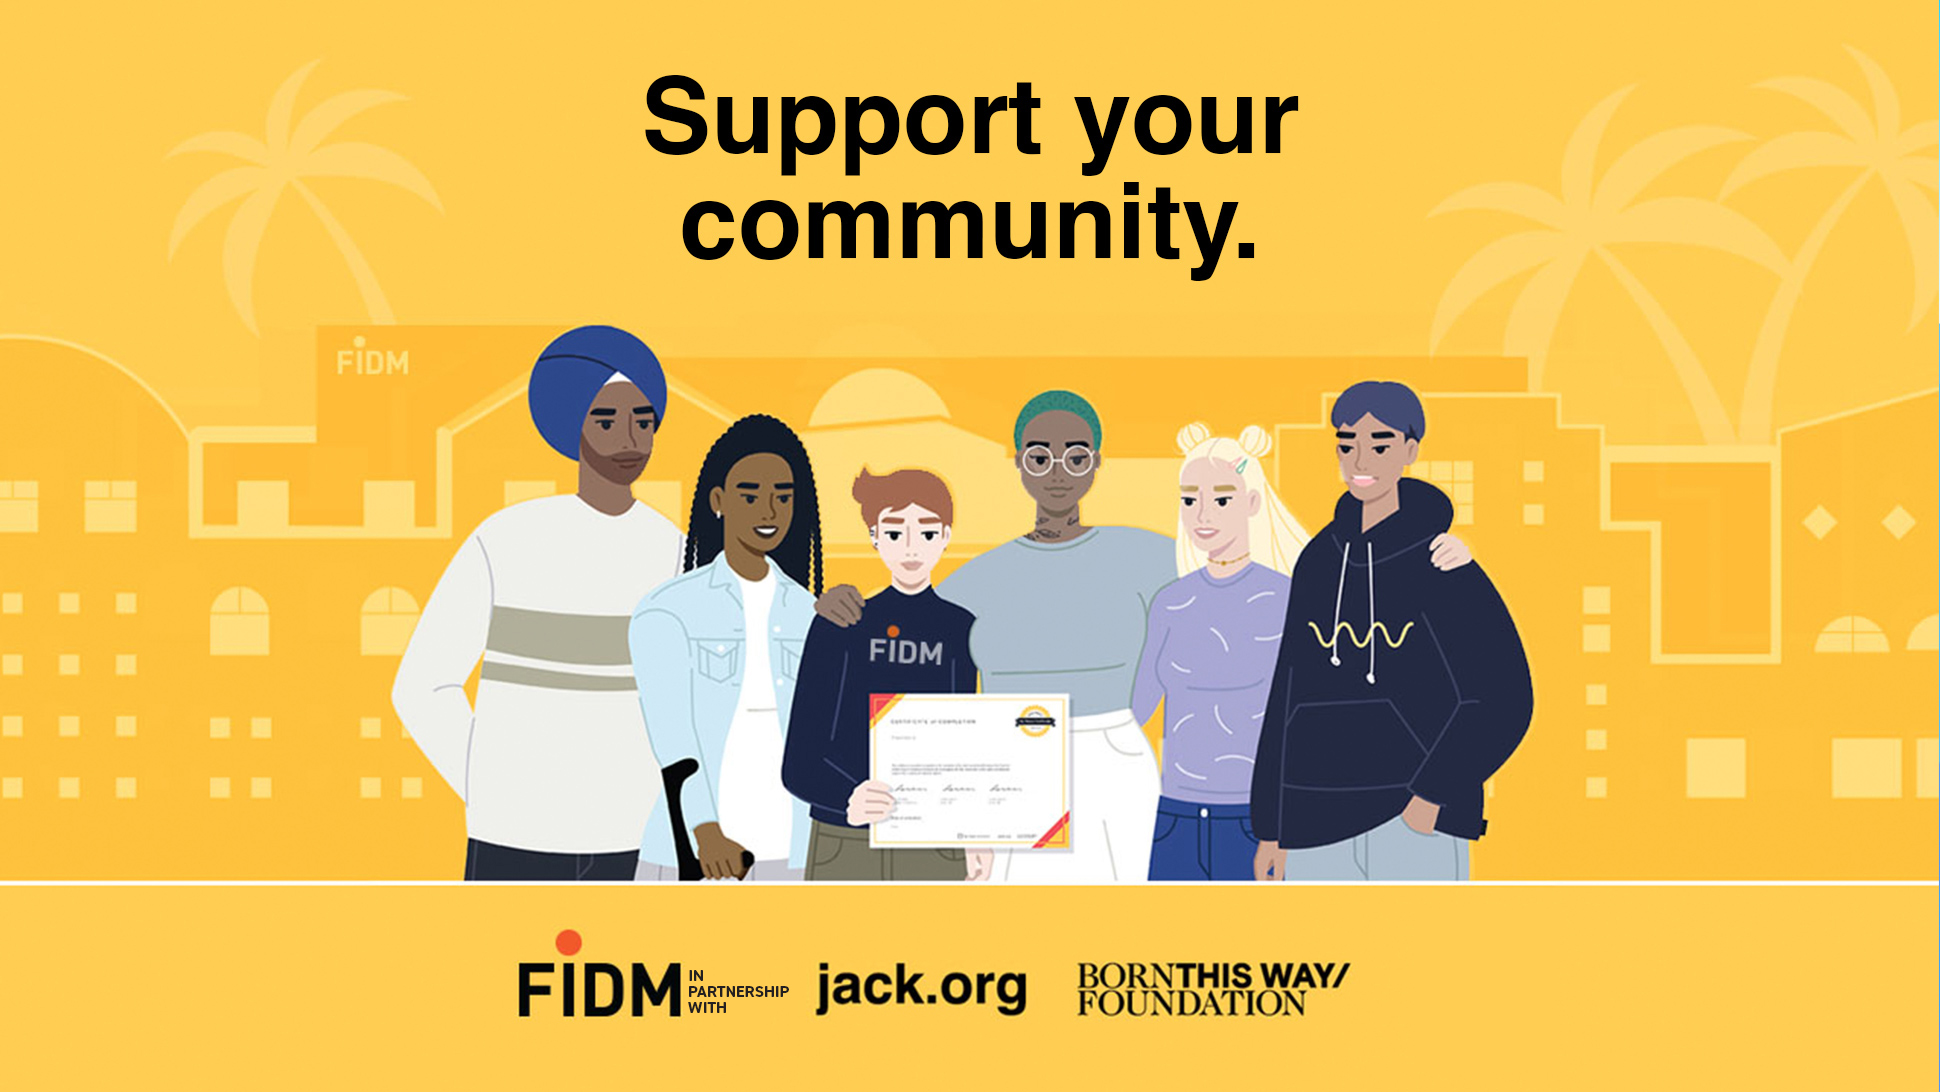 Support your FIDM community